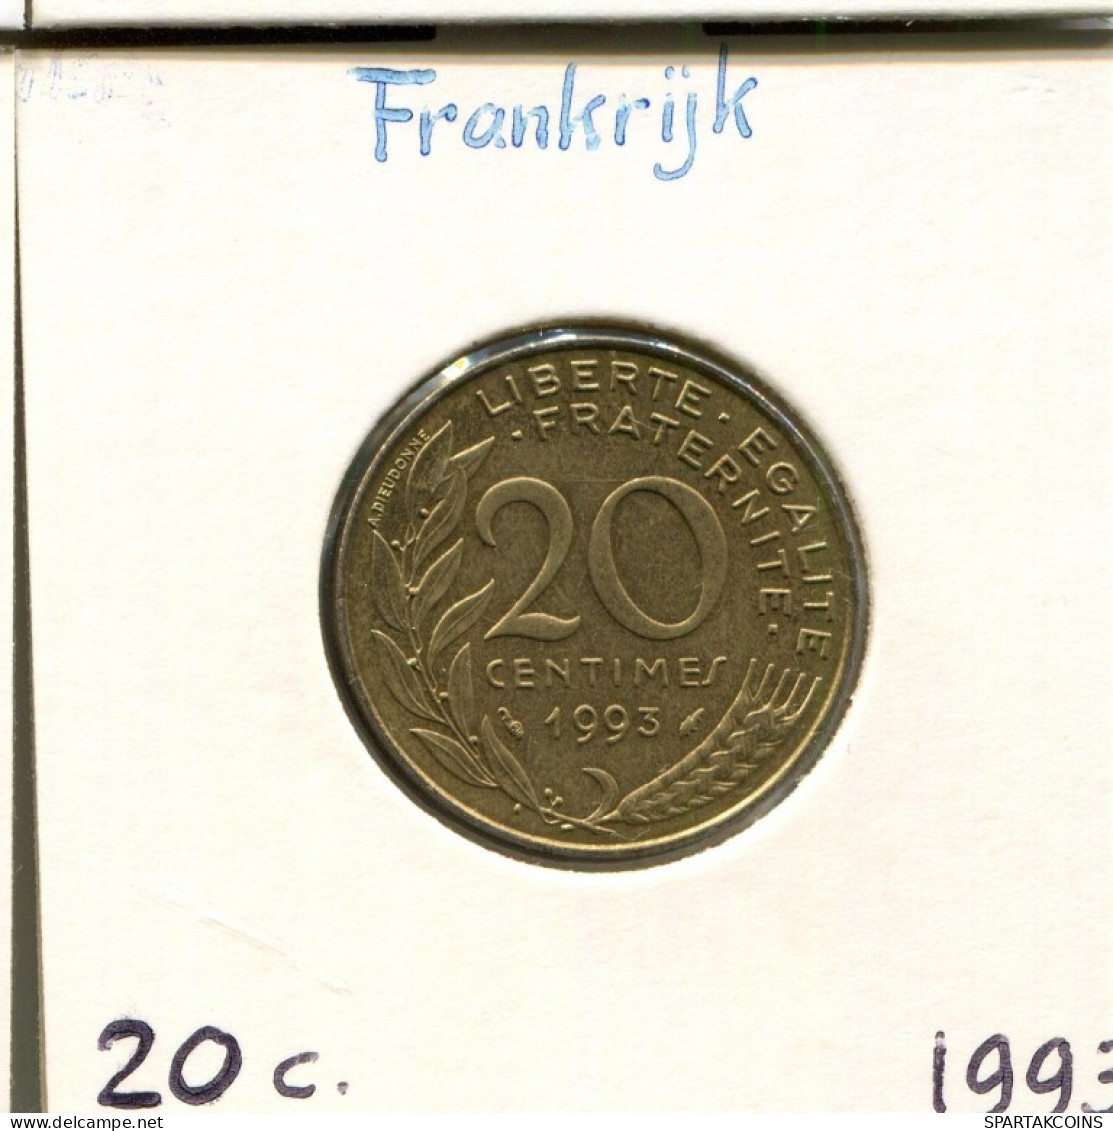 20 CENTIMES 1993 FRANCE Coin French Coin #AM189.U.A - 20 Centimes